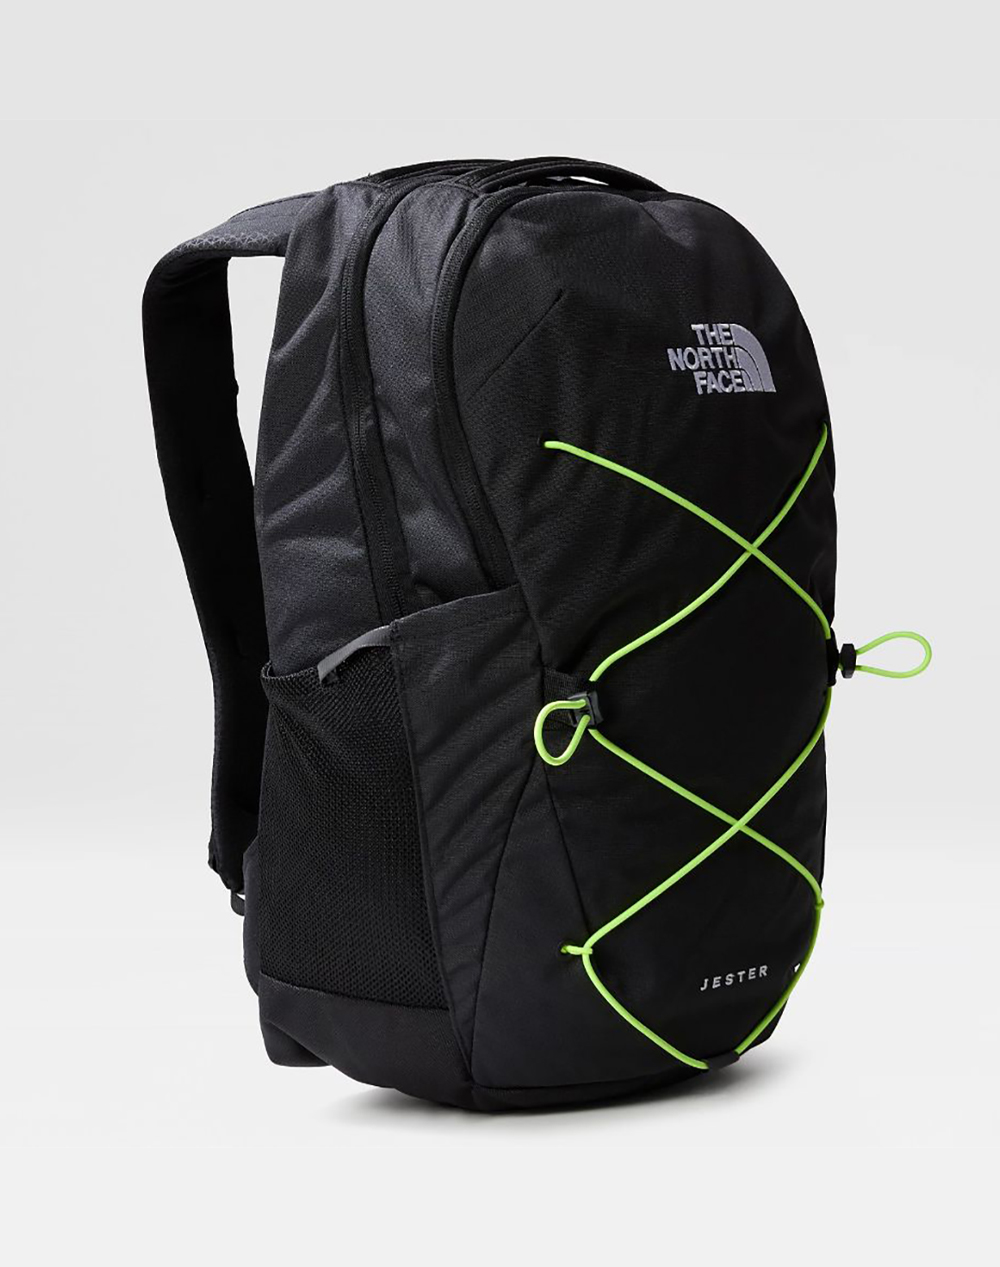 THE NORTH FACE JESTER BACKPACK (Διαστάσεις: 28 x 21 x 46 εκ) NF0A3VXF-NFIC4 JetBlack 3800ATNFA6220004_XR29614